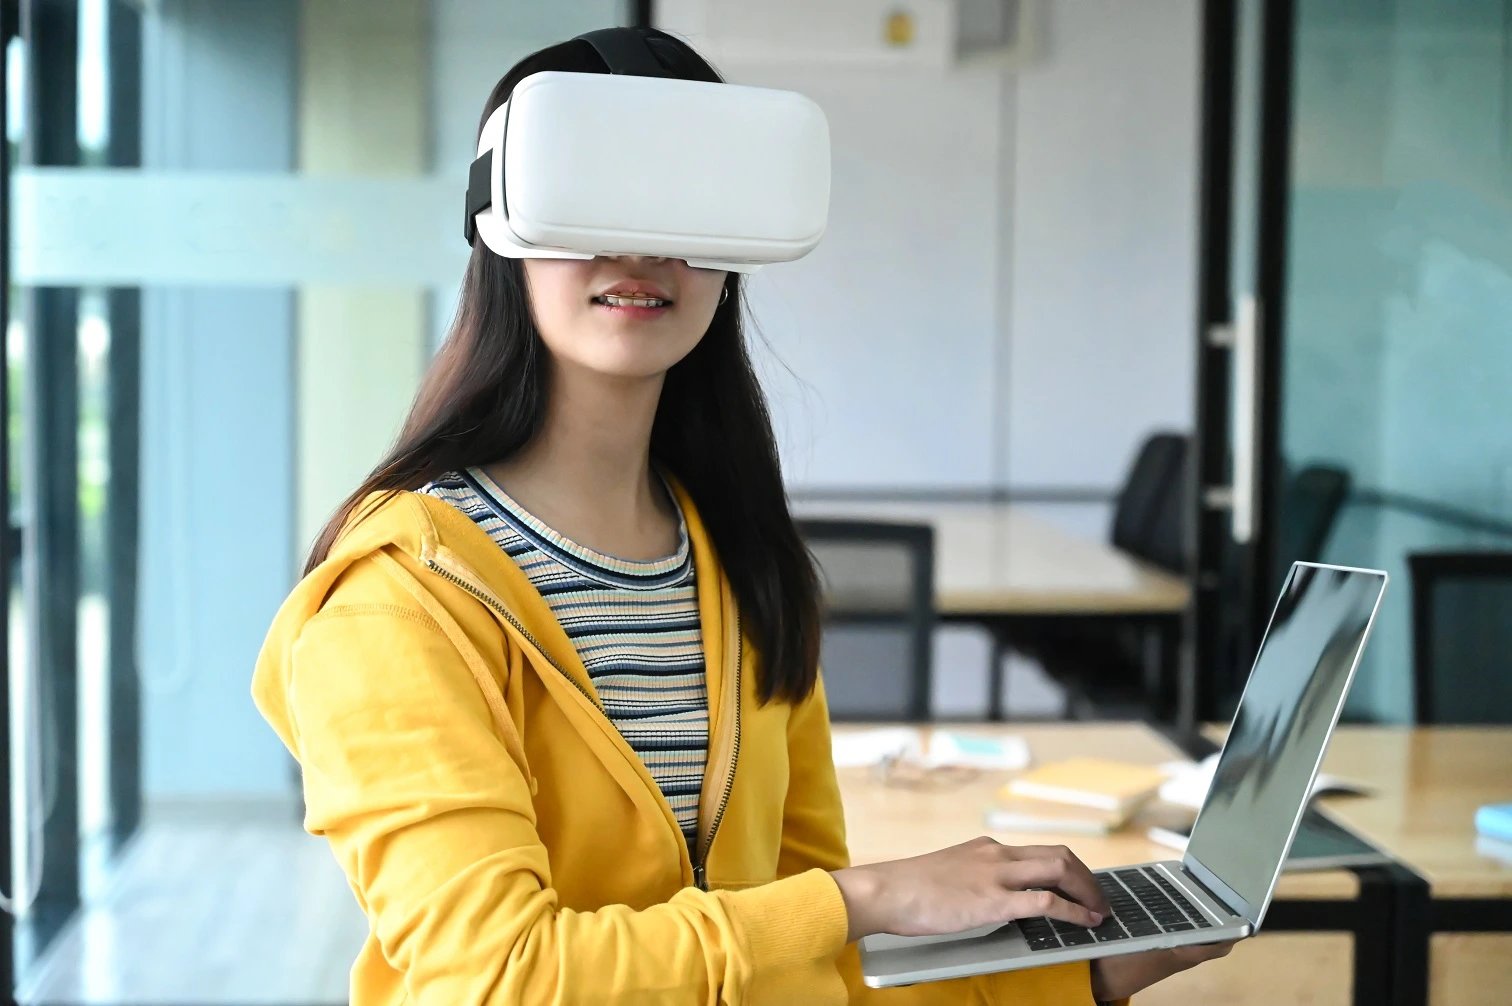 VR increases students’ access to careers guidance